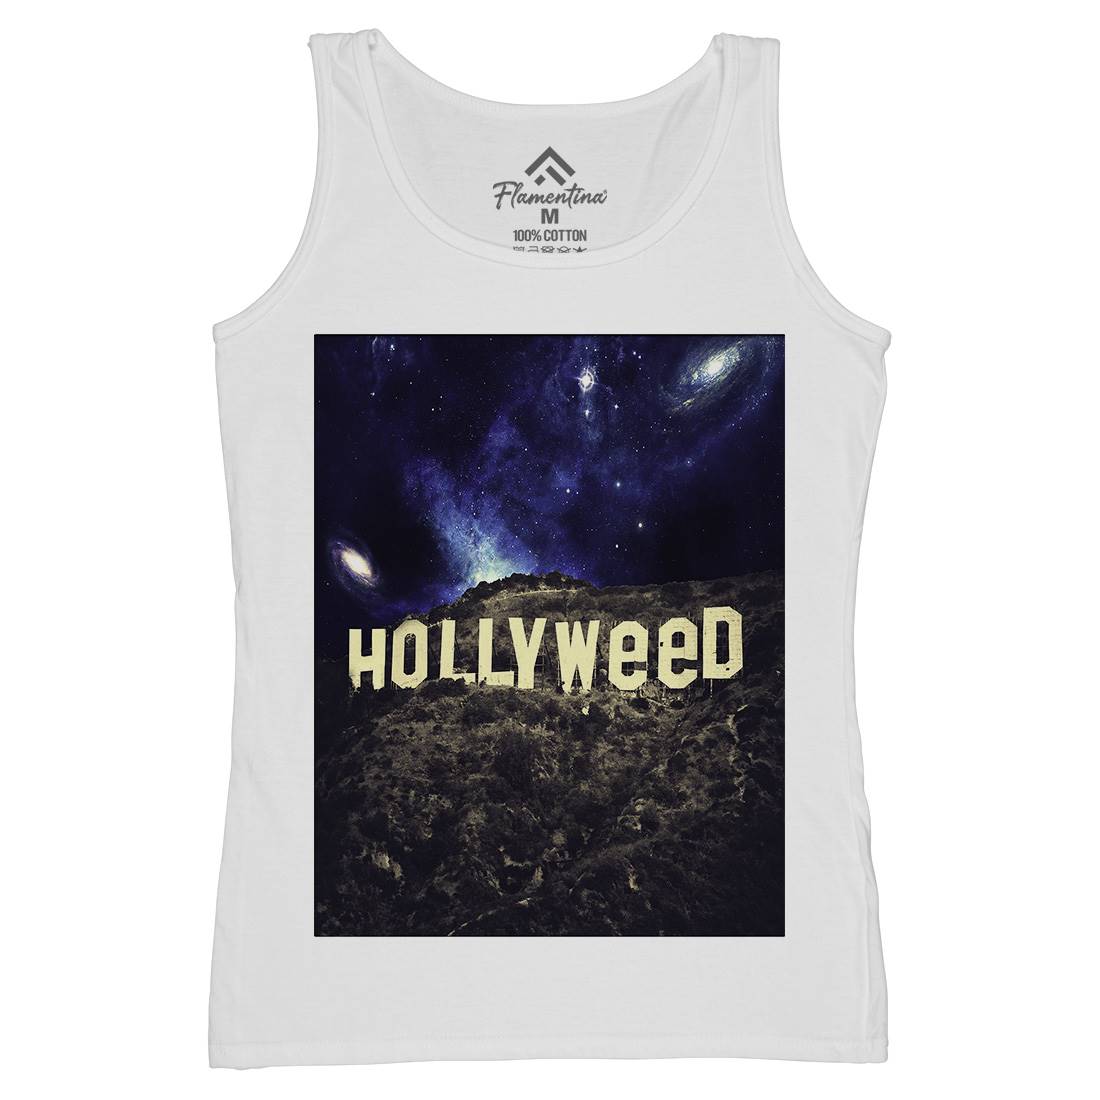 Hollyweed Womens Organic Tank Top Vest Space A847